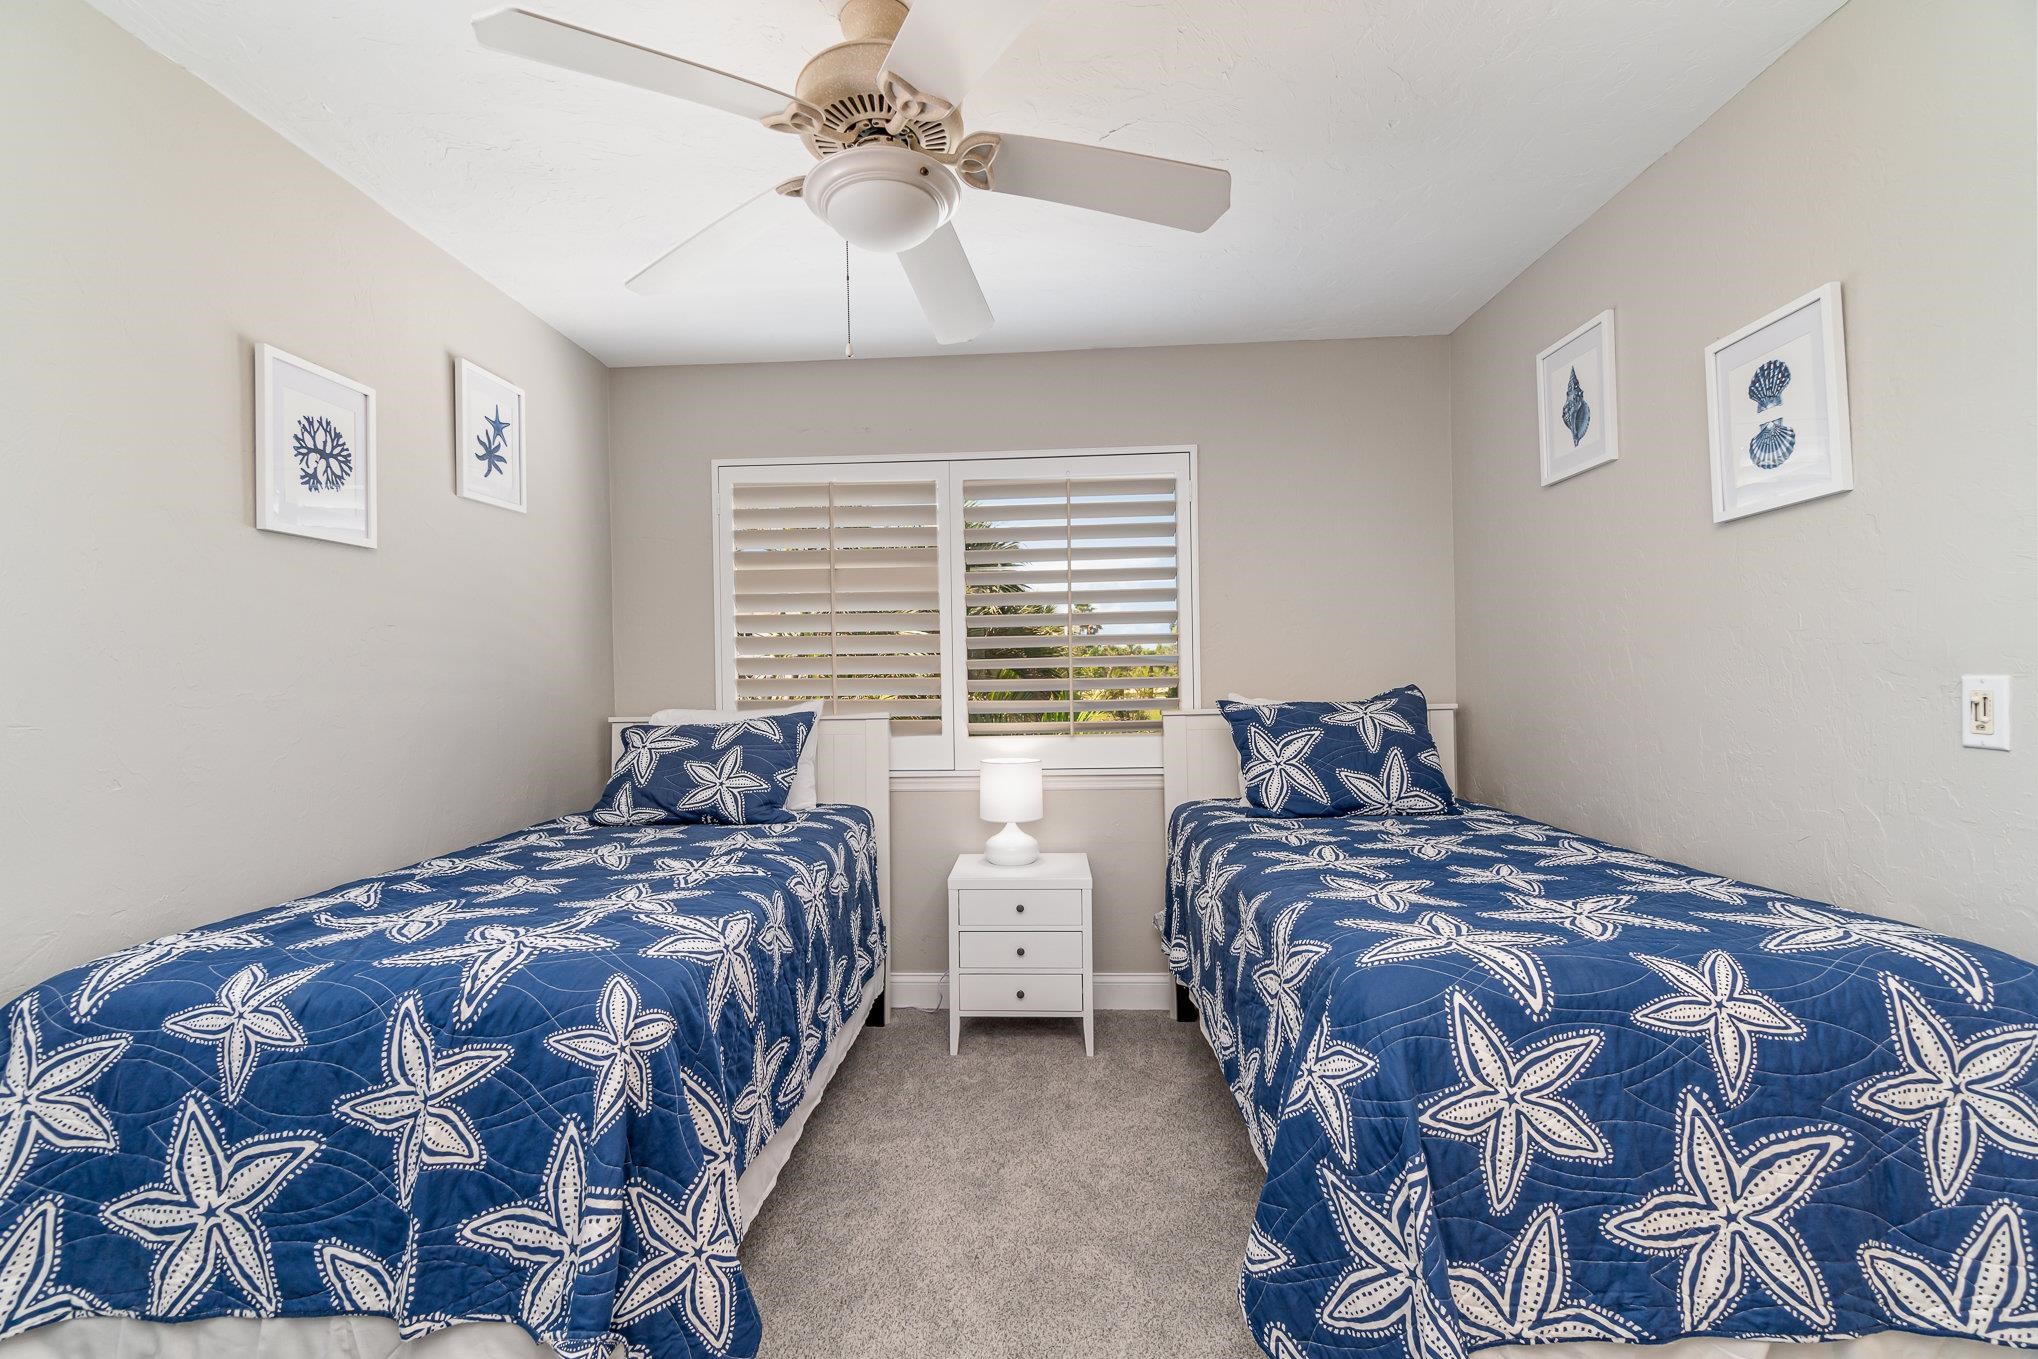 1299 Middle Gulf Drive, Sanibel, Florida 33957, 3 Bedrooms Bedrooms, ,2 BathroomsBathrooms,Condo,For Sale,Middle Gulf Drive,2240384